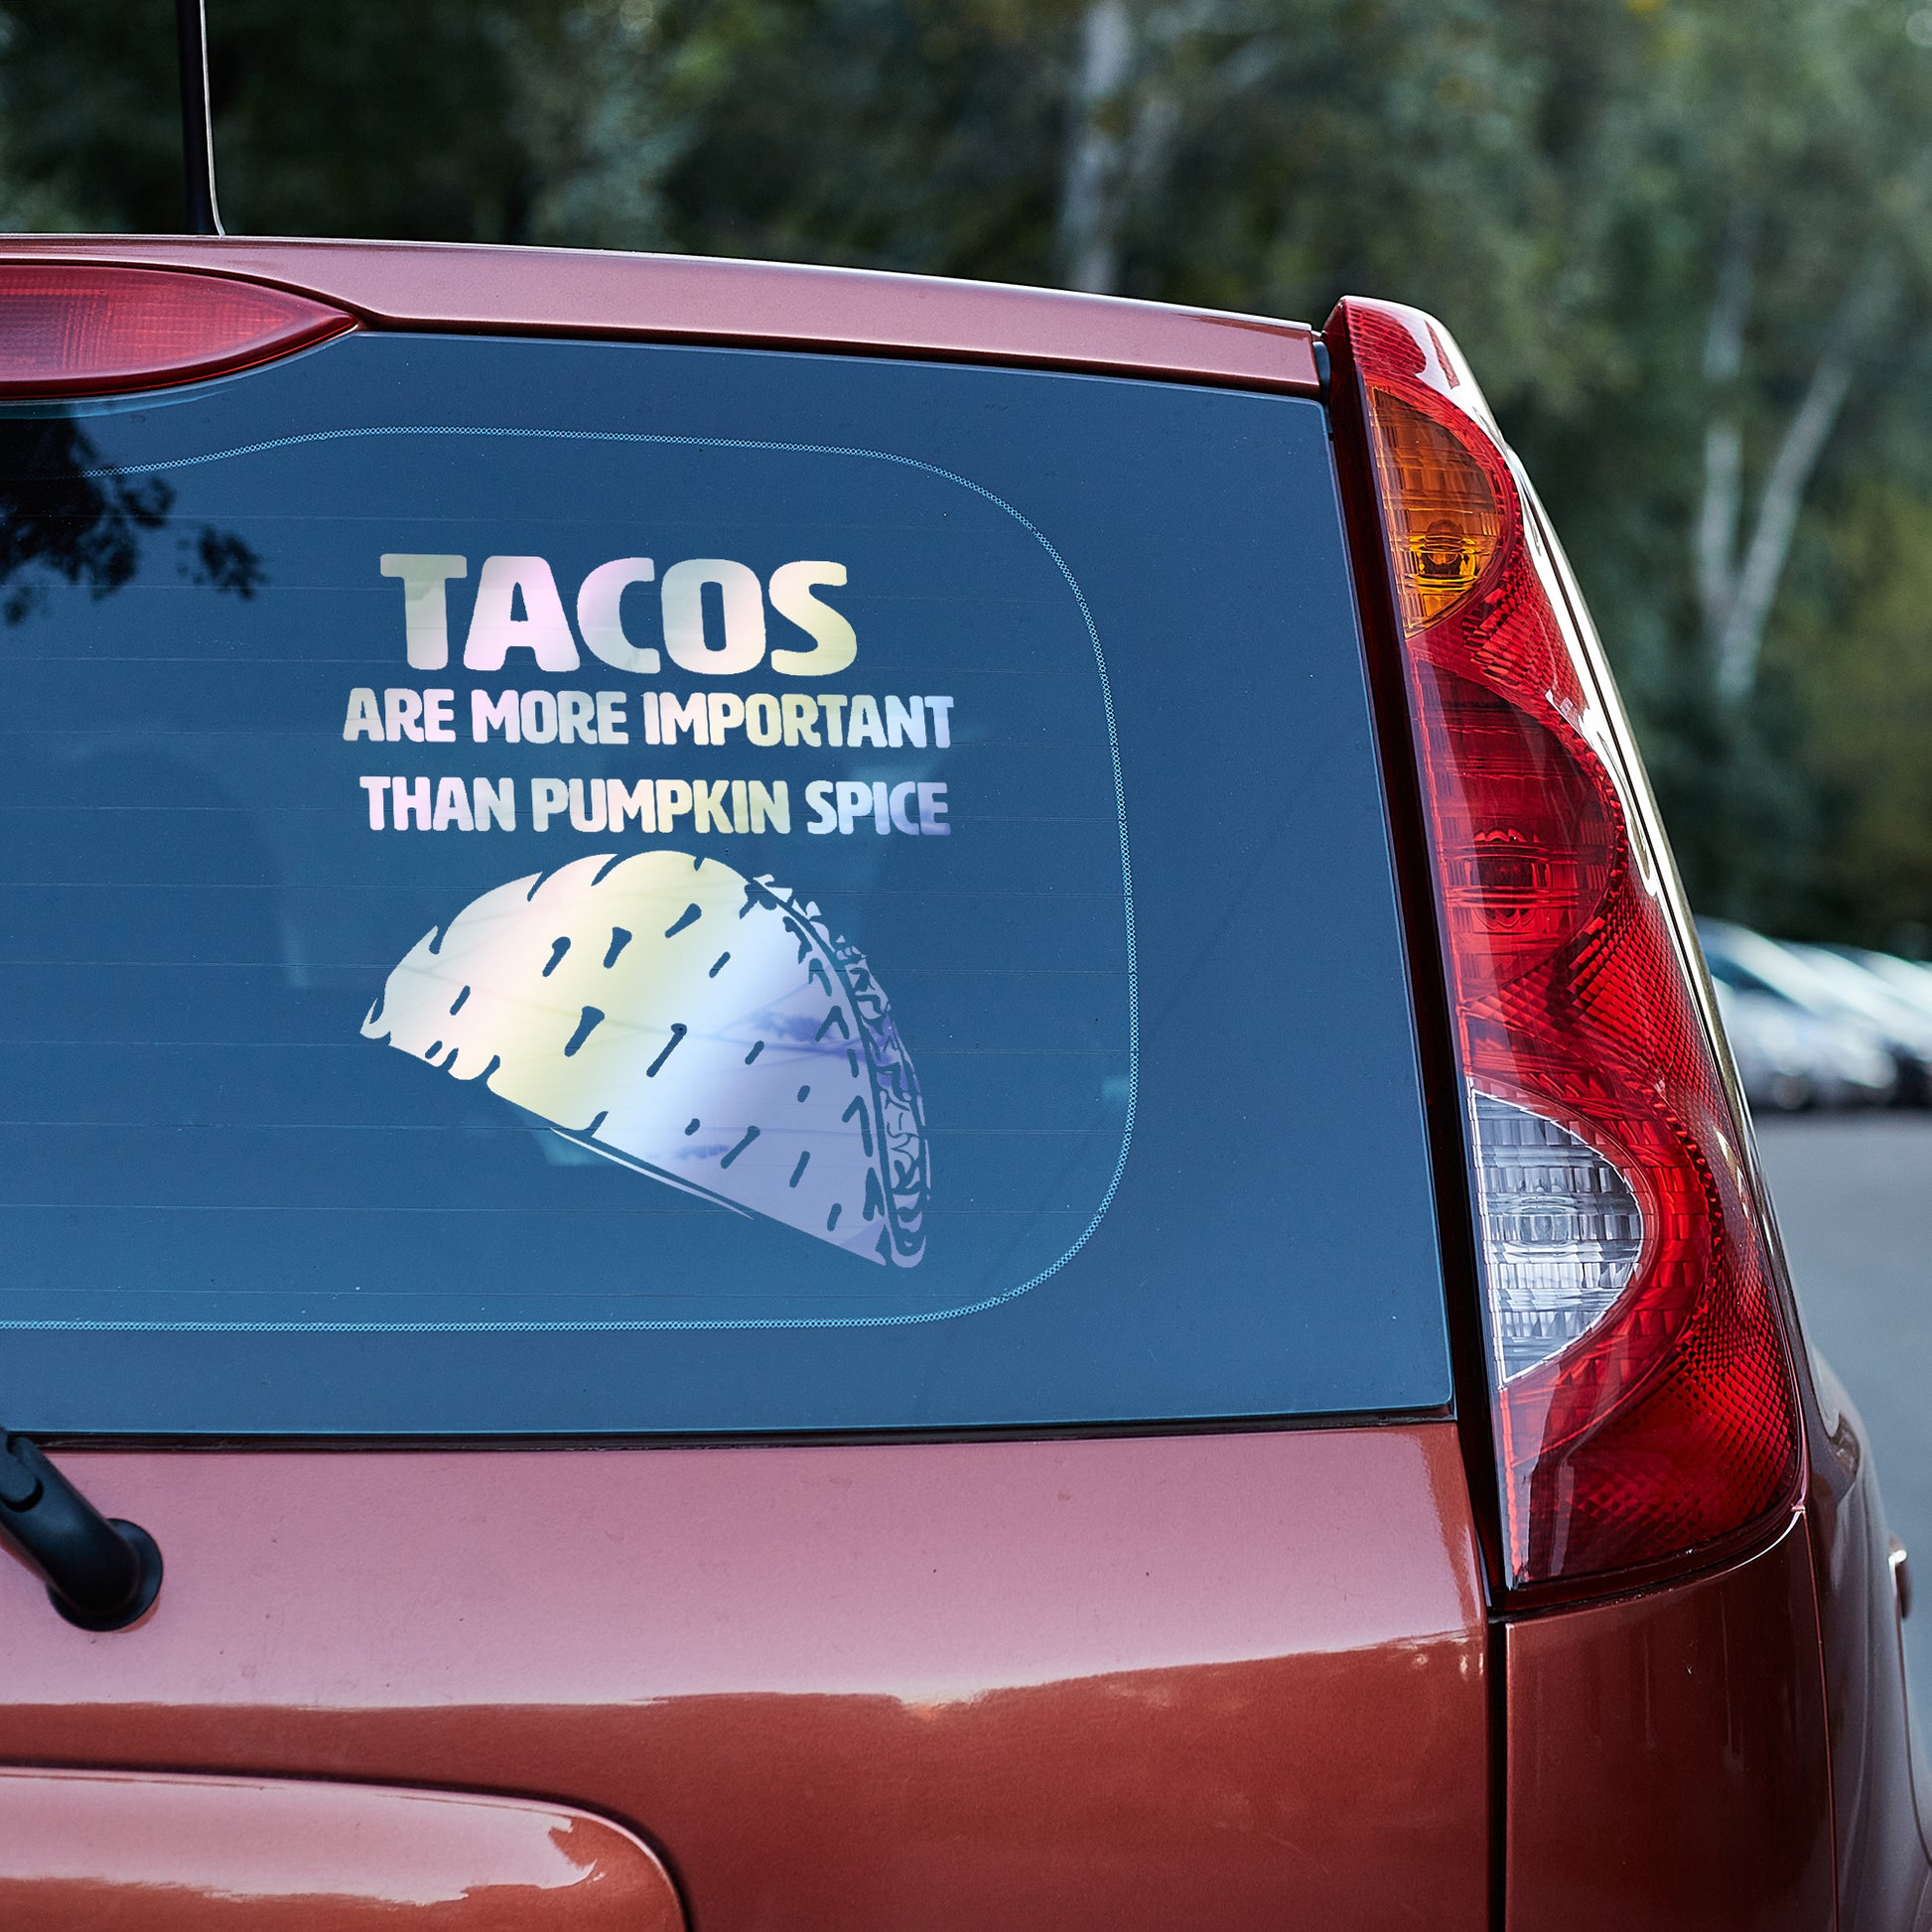 Tacos are more important than pumpkin spice Vinyl decal decal stickers Decals for cars Decals for Trucks decals for tumblers Epstein Epstein Client List minivan minivan sticker SUV decals Taco truck decals window decal car Window decals window decor